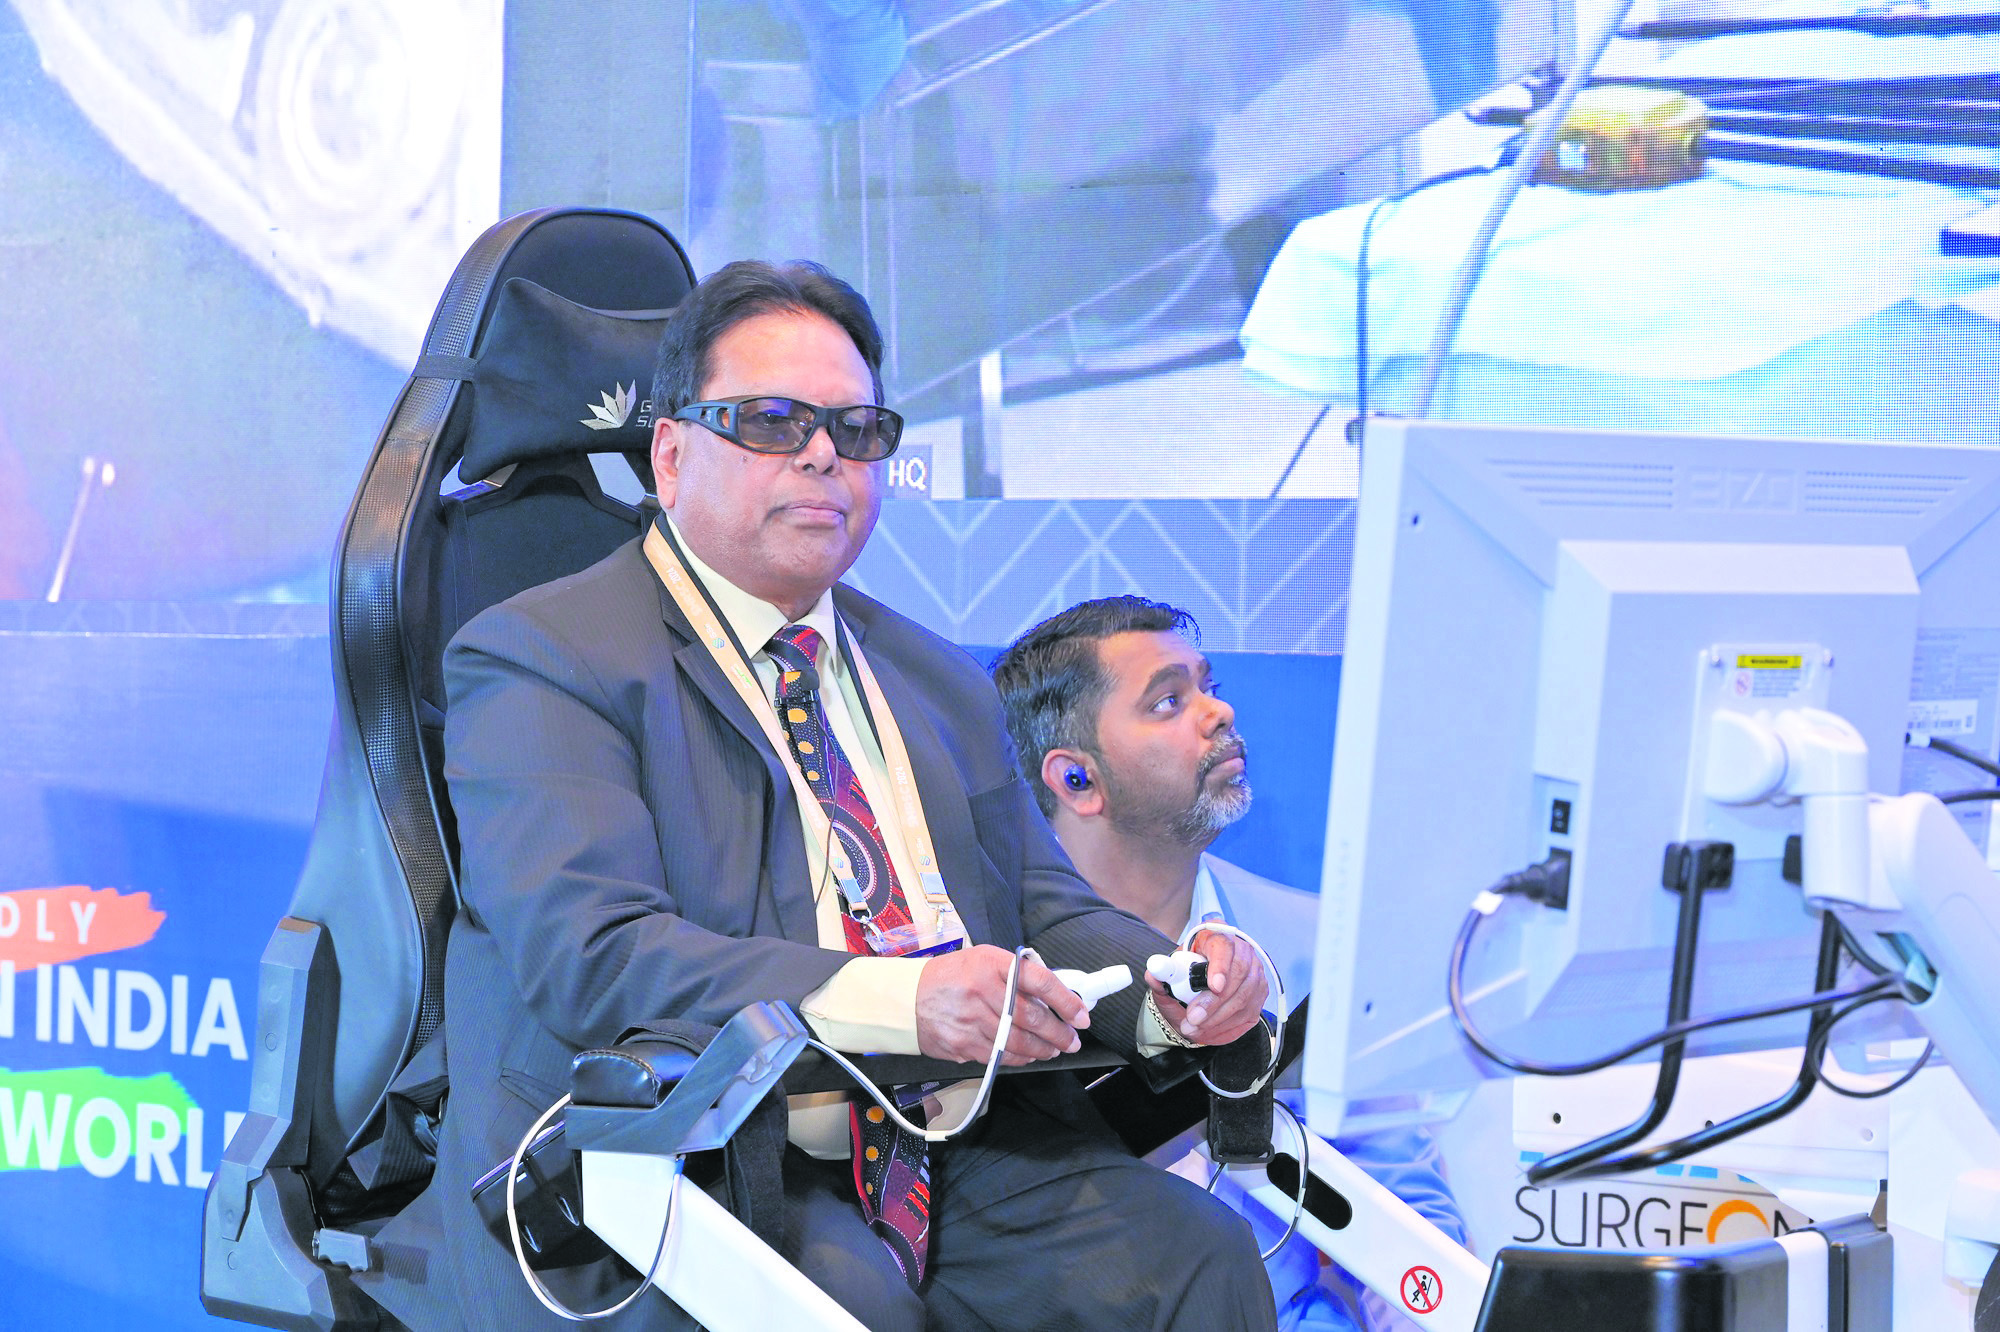 SSI mantra shines at global Robotic Surgery conference